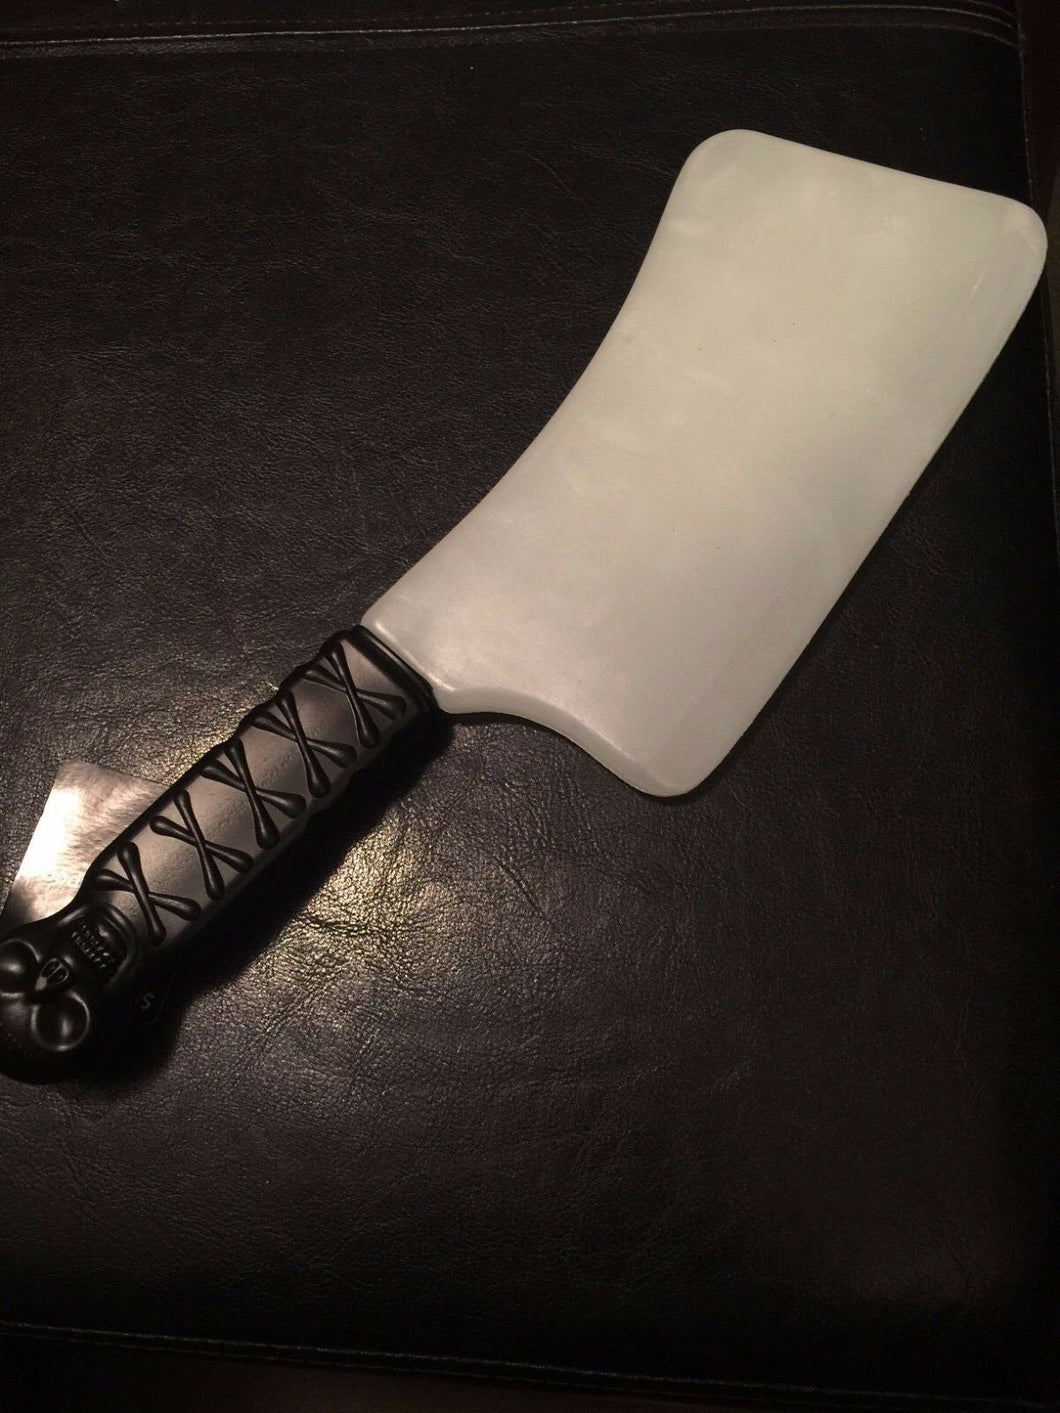 Glow in the Dark Weapons - Knife, Cleaver, Sickle - Perfect for Cosplay!